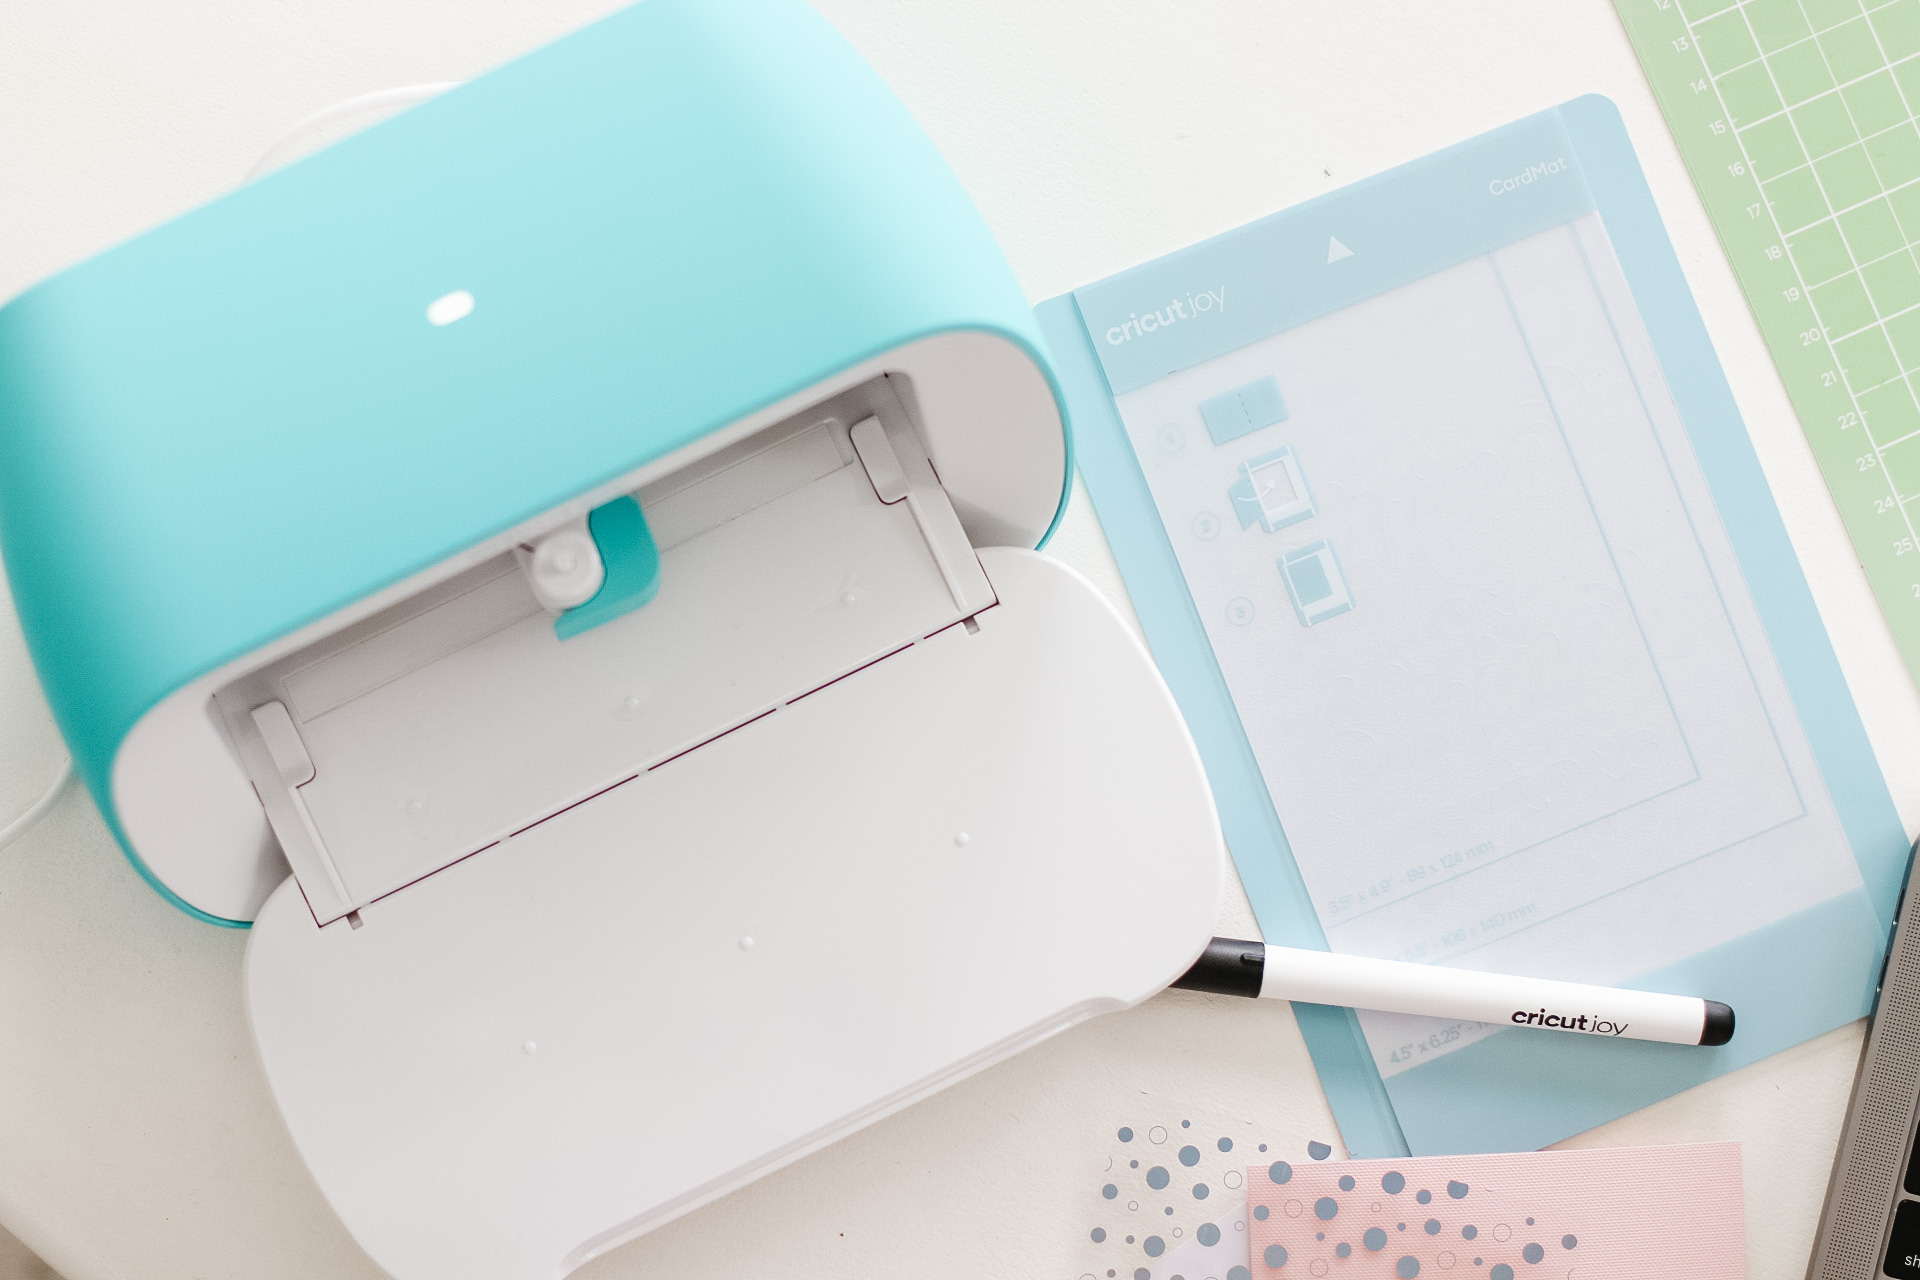 Three little things to make with Cricut Joy